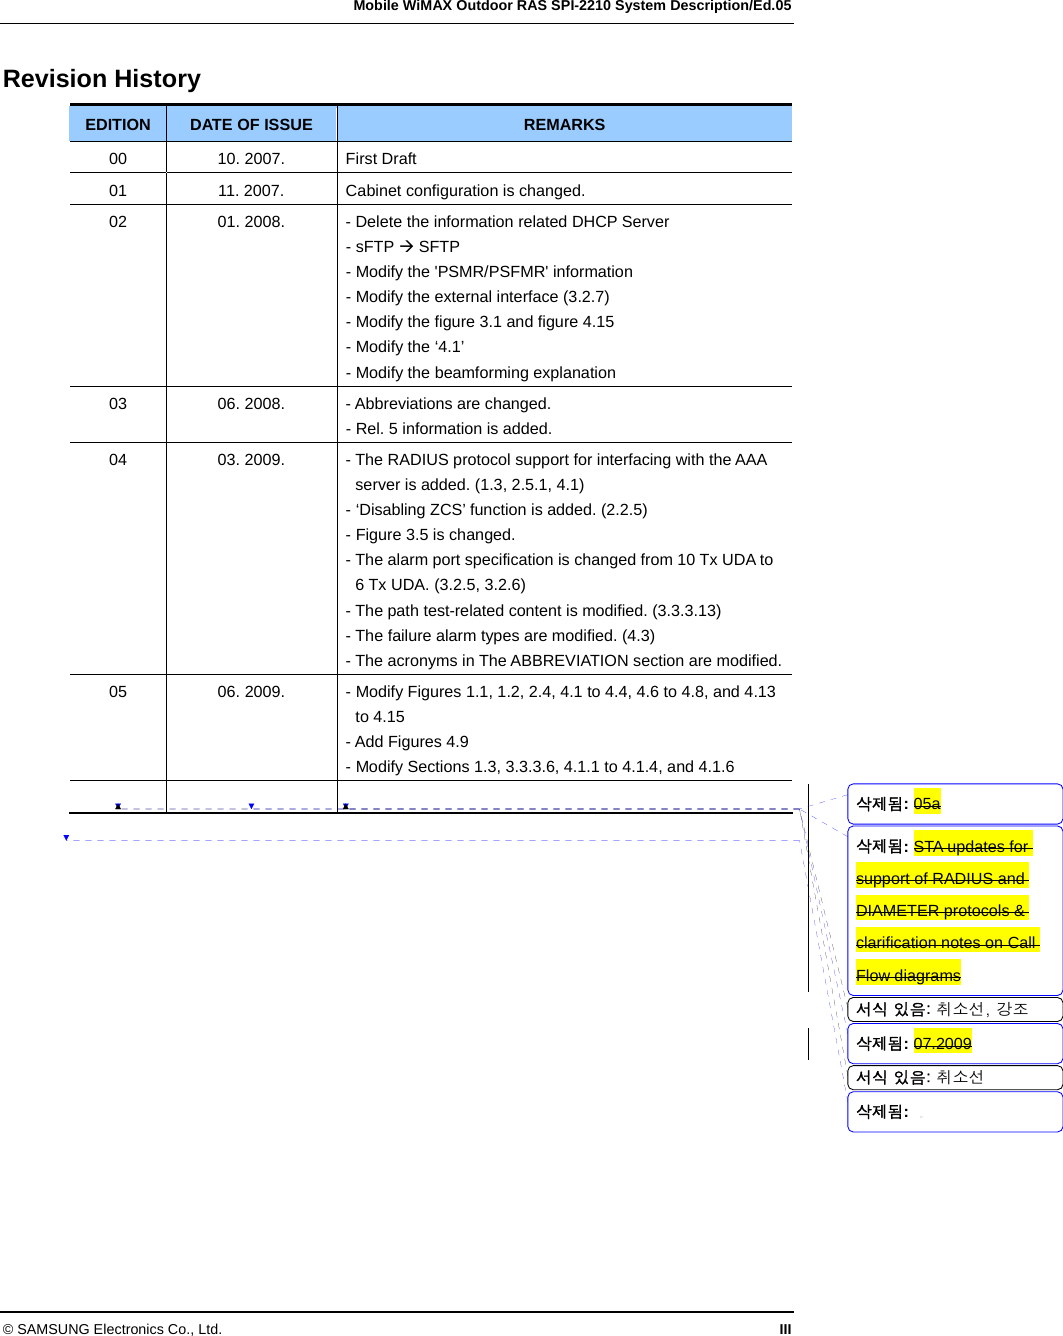   Mobile WiMAX Outdoor RAS SPI-2210 System Description/Ed.05 © SAMSUNG Electronics Co., Ltd.  III Revision History EDITION  DATE OF ISSUE  REMARKS 00  10. 2007.  First Draft 01  11. 2007.  Cabinet configuration is changed. 02  01. 2008.  - Delete the information related DHCP Server - sFTP Æ SFTP - Modify the &apos;PSMR/PSFMR&apos; information - Modify the external interface (3.2.7) - Modify the figure 3.1 and figure 4.15 - Modify the ‘4.1’ - Modify the beamforming explanation 03  06. 2008.  - Abbreviations are changed. - Rel. 5 information is added. 04  03. 2009.  - The RADIUS protocol support for interfacing with the AAA server is added. (1.3, 2.5.1, 4.1) - ‘Disabling ZCS’ function is added. (2.2.5) - Figure 3.5 is changed. - The alarm port specification is changed from 10 Tx UDA to 6 Tx UDA. (3.2.5, 3.2.6) - The path test-related content is modified. (3.3.3.13) - The failure alarm types are modified. (4.3) - The acronyms in The ABBREVIATION section are modified. 05  06. 2009.  - Modify Figures 1.1, 1.2, 2.4, 4.1 to 4.4, 4.6 to 4.8, and 4.13 to 4.15 - Add Figures 4.9 - Modify Sections 1.3, 3.3.3.6, 4.1.1 to 4.1.4, and 4.1.6      서식 있음: 취소선, 강조서식 있음: 취소선삭제됨: 05a삭제됨: STA updates for support of RADIUS and DIAMETER protocols &amp; clarification notes on Call Flow diagrams삭제됨: 07.2009삭제됨: 